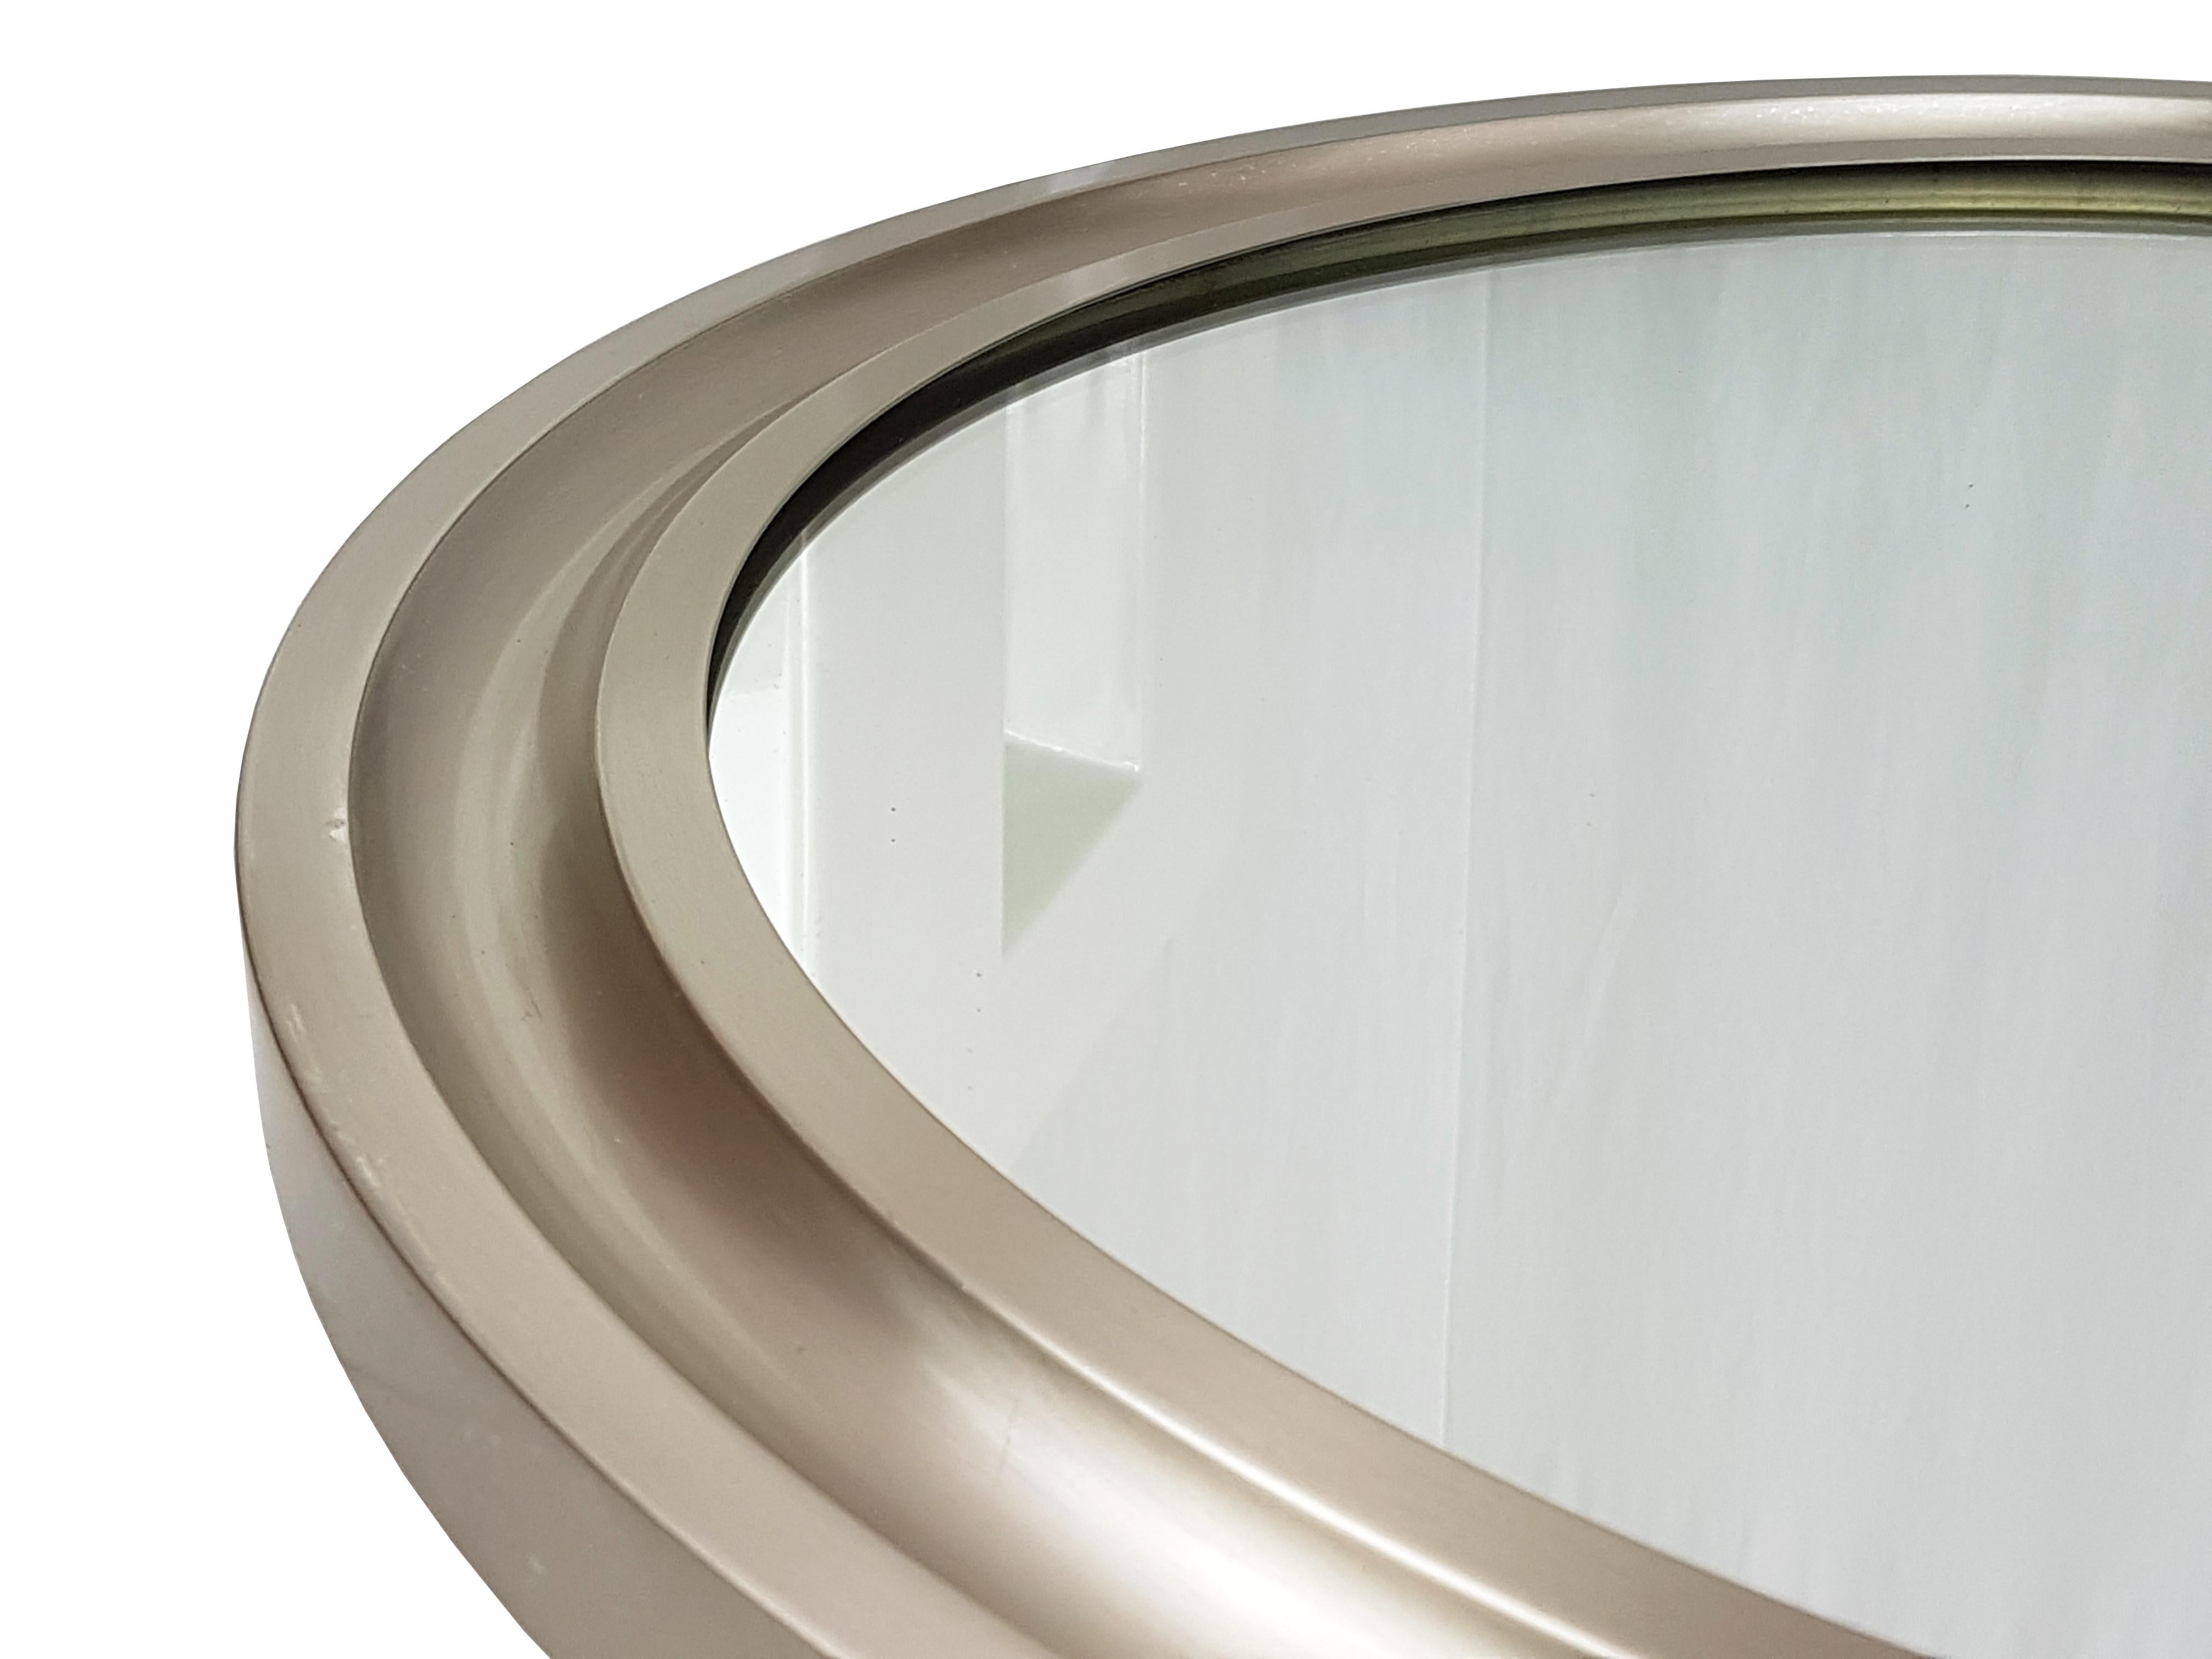 Space Age Nickeled & Black Metal 1970s Round Wall Mirror Narcisso by S. Mazza for Artemide